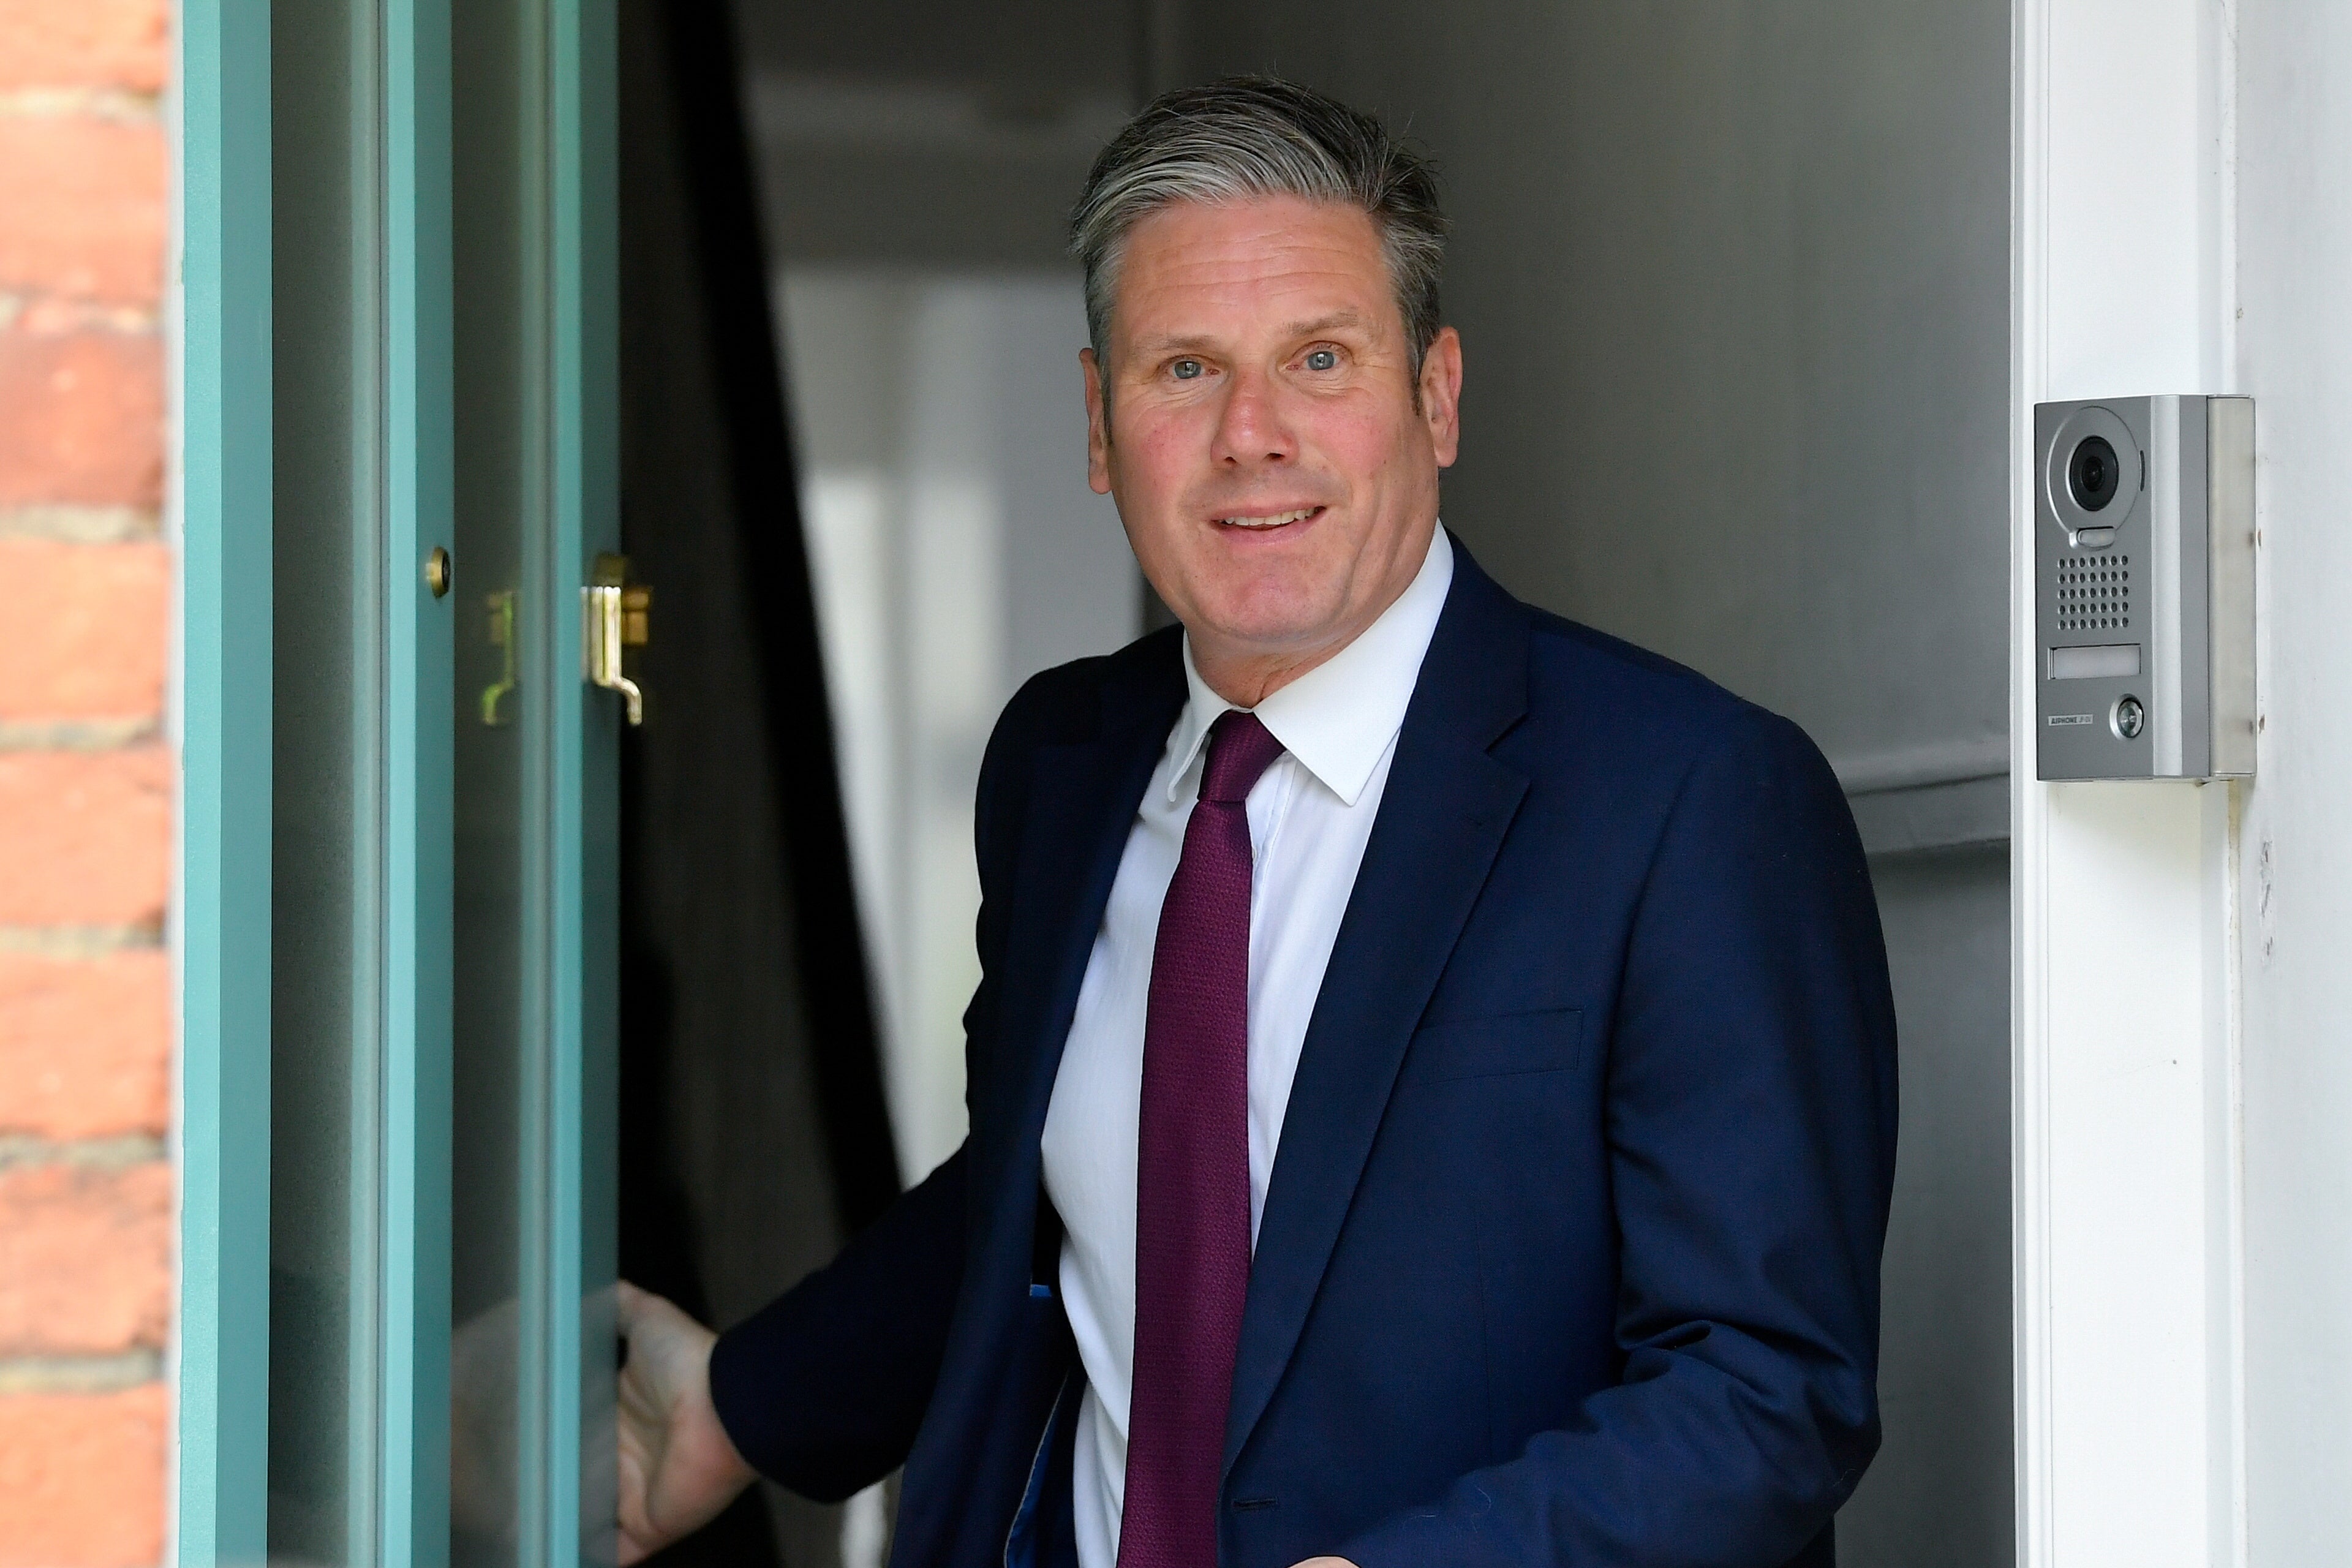 Only one in four people think Labour under Keir Starmer would do a better job in government than the Tories. That is one figure Starmer urgently needs to increase